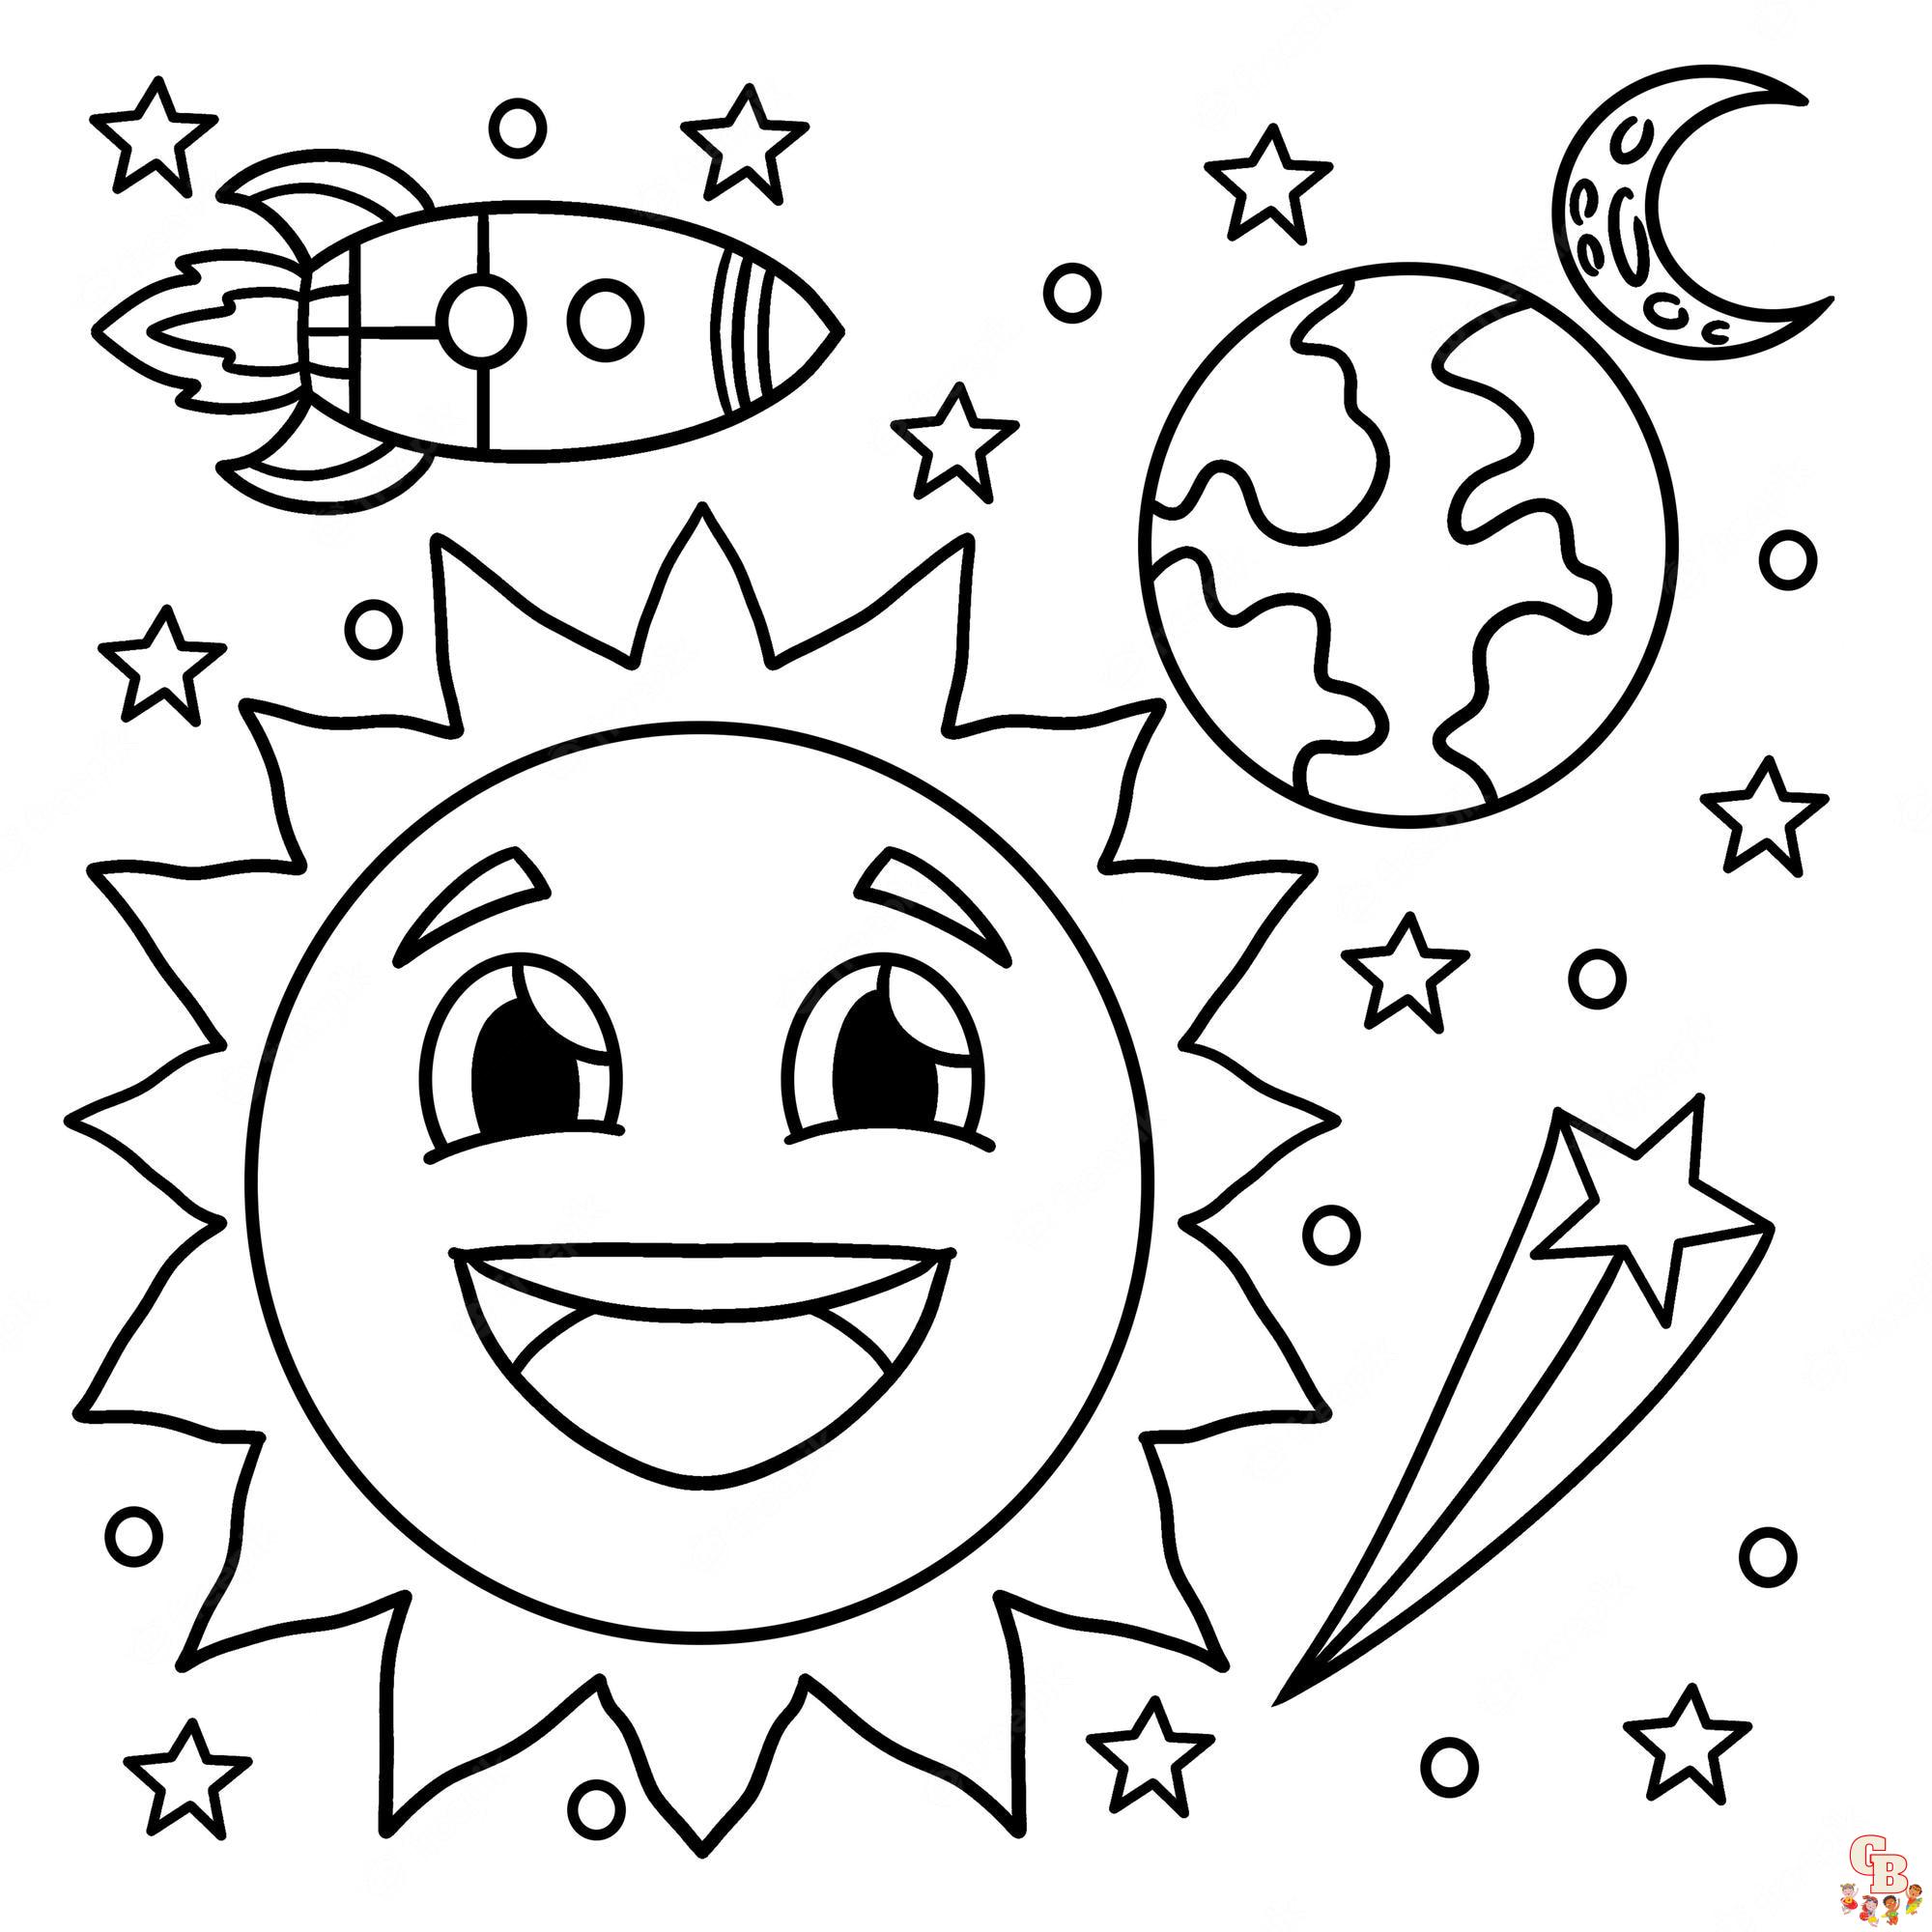 Enjoy Coloring the Sun with Free Printable Sun Coloring Pages